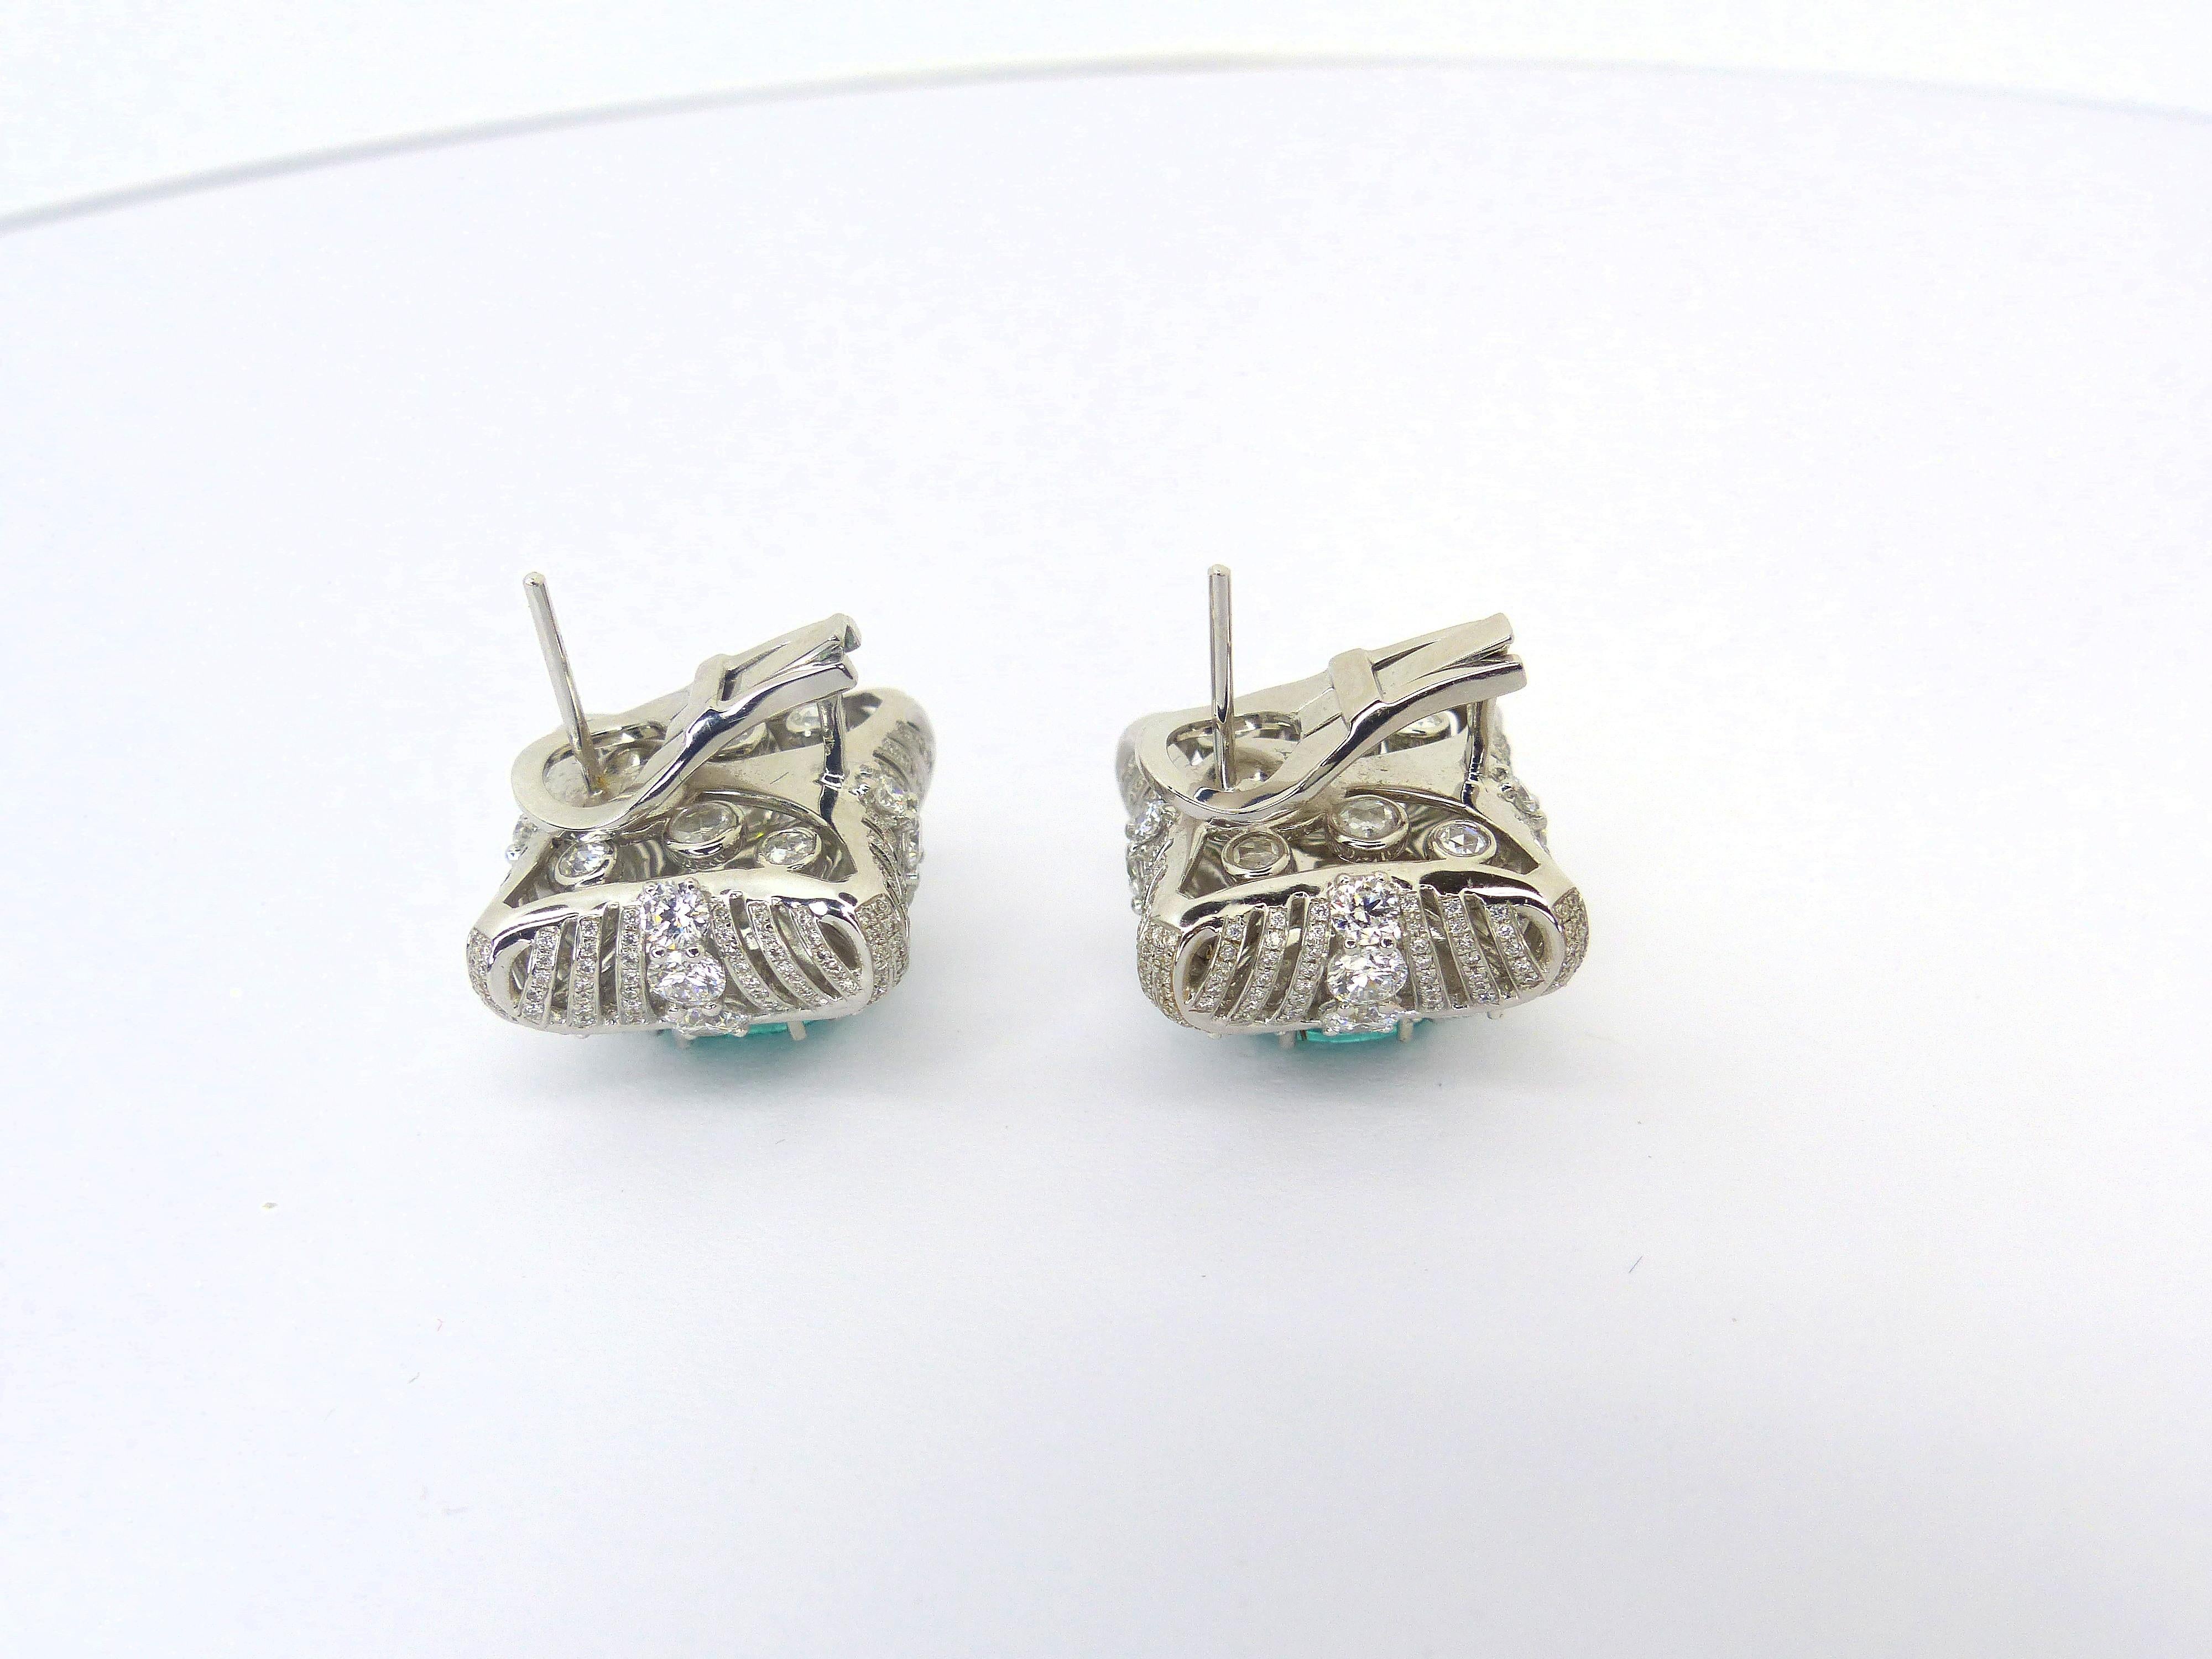 Neoclassical Earrings in White Gold with 2 blue/green Paraiba Tourmalines and Diamonds